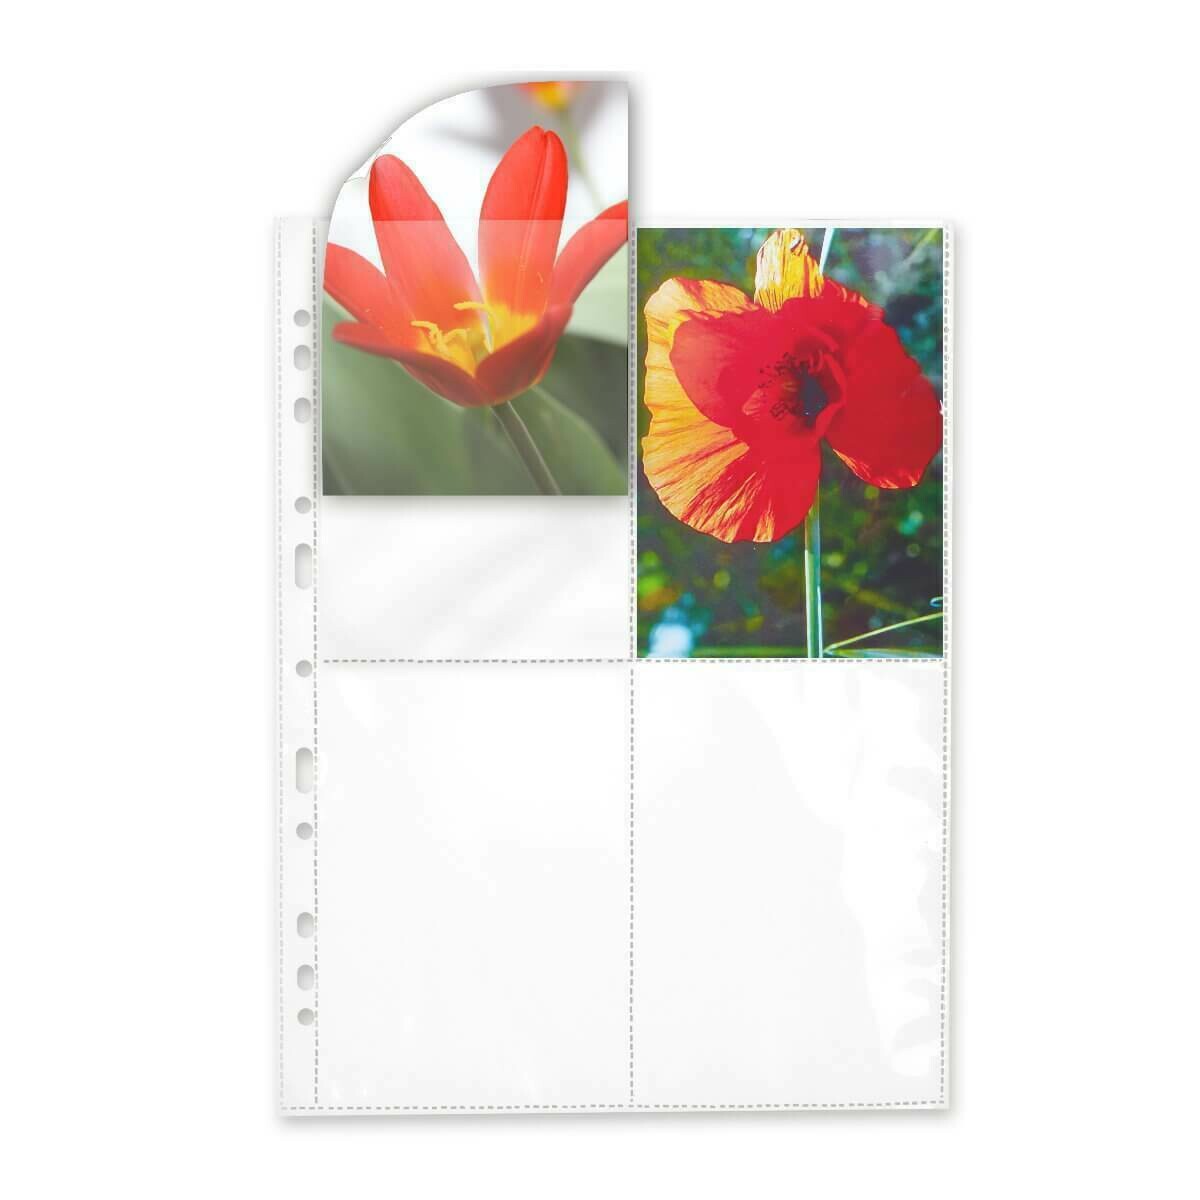 Transparent sleeves for Polaroid 600/SX70 - 25 sheets